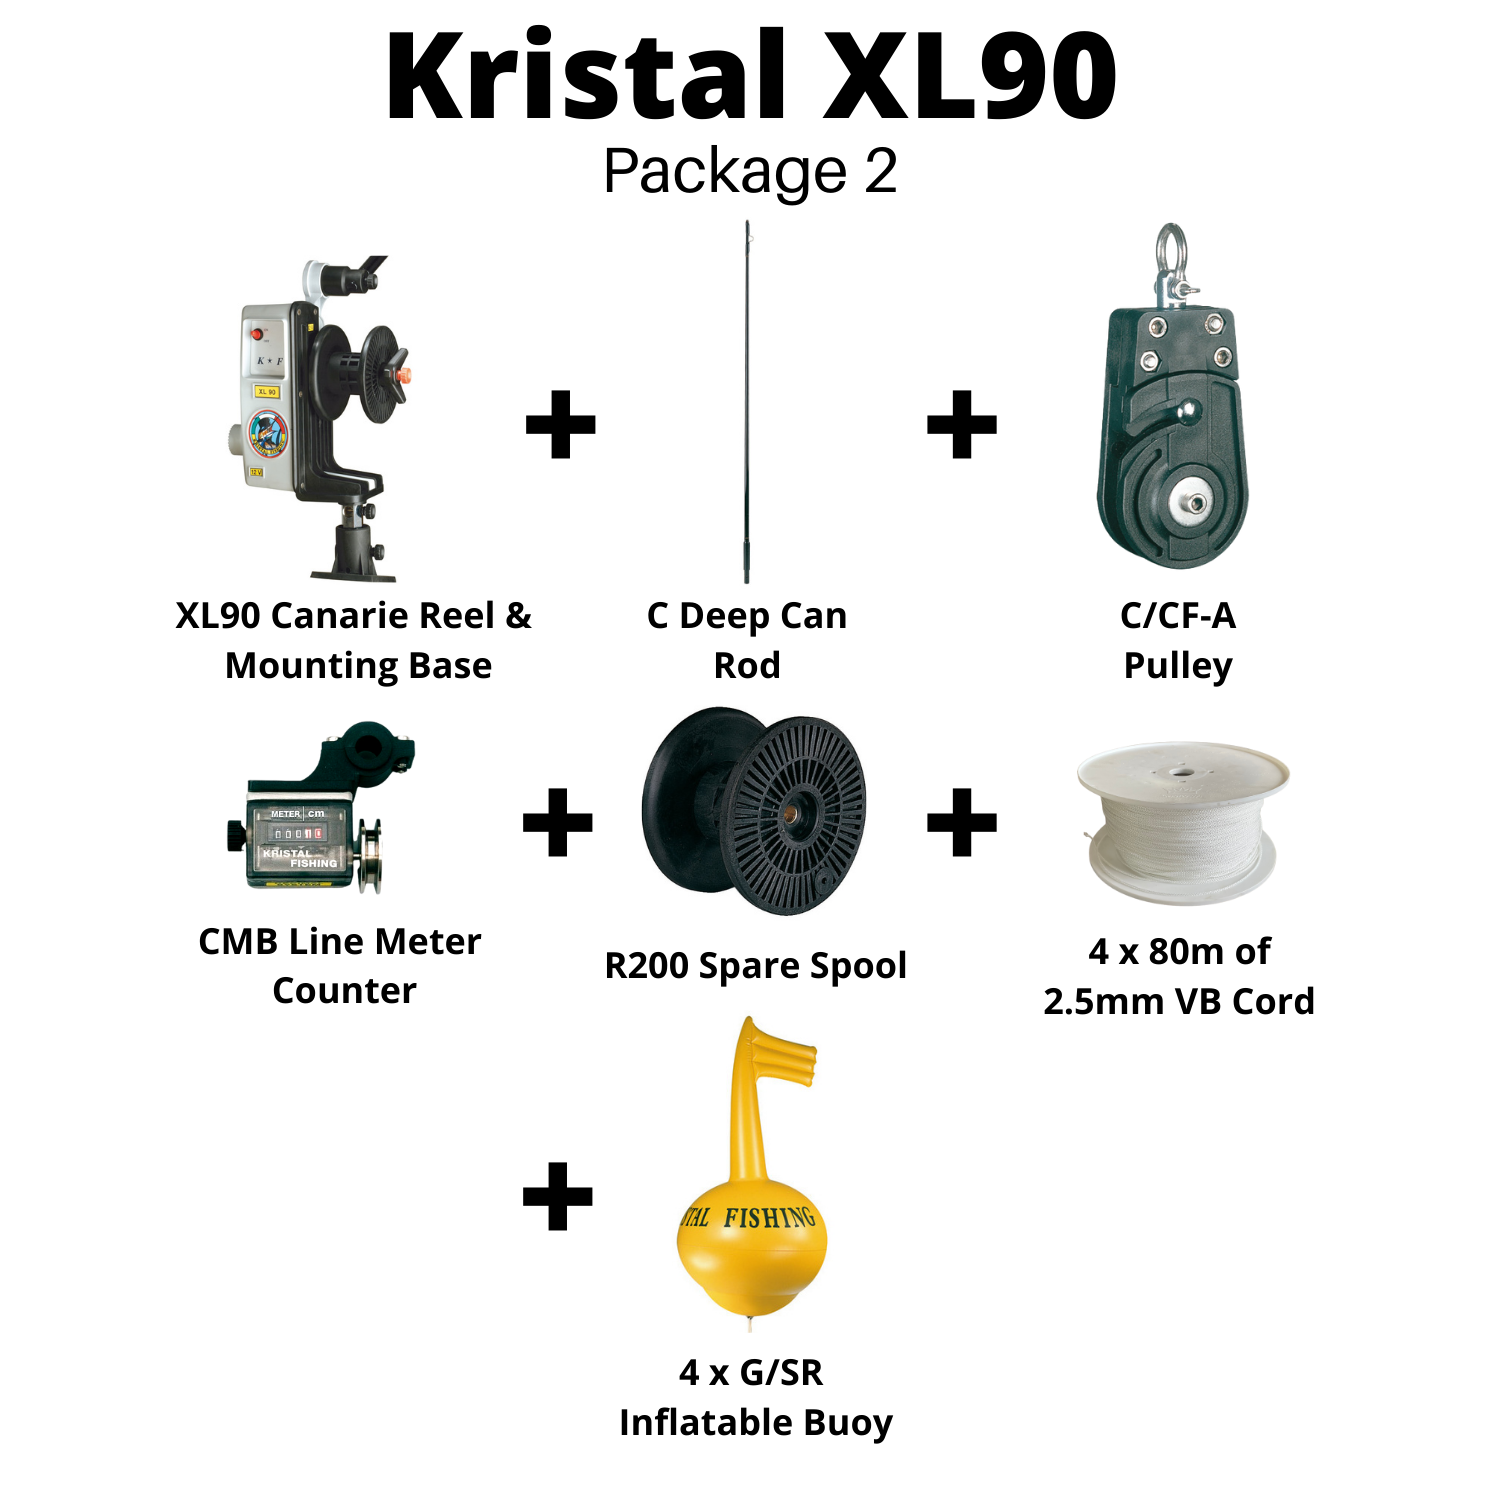 Kristal XL90 Canarie Pot Hauler Systems - Package 2